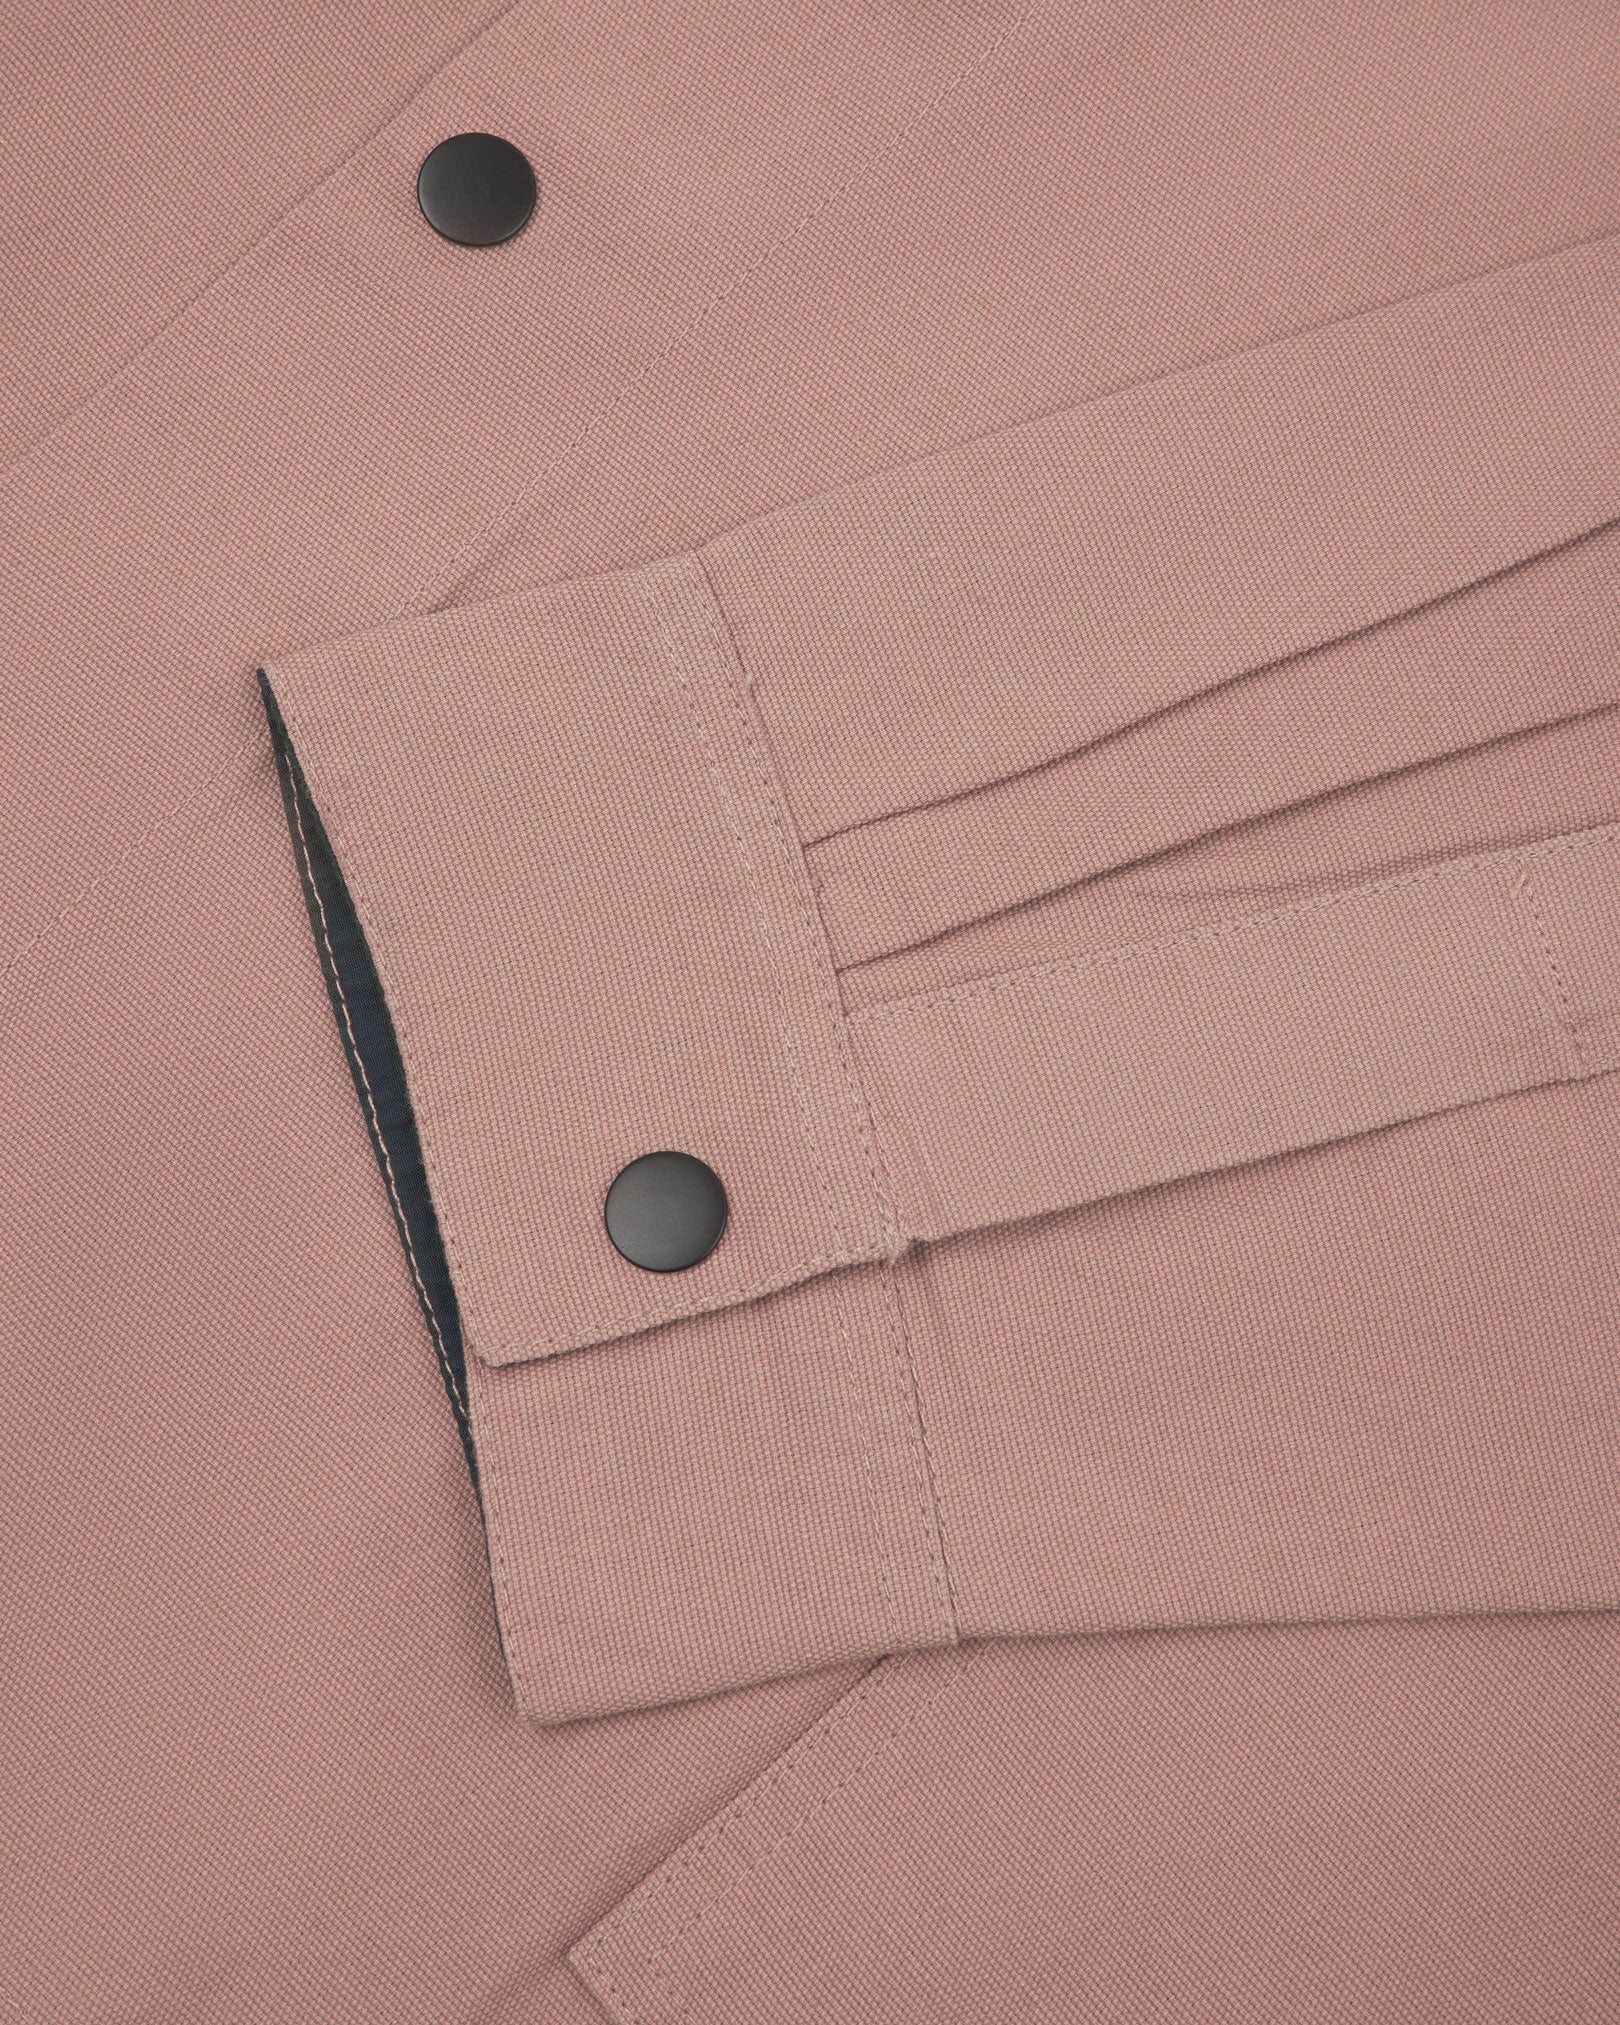 Sleeve view of Uskees 3013 dusty pink organic cotton coach jacket with focus on placket, cuff and popper buttons.